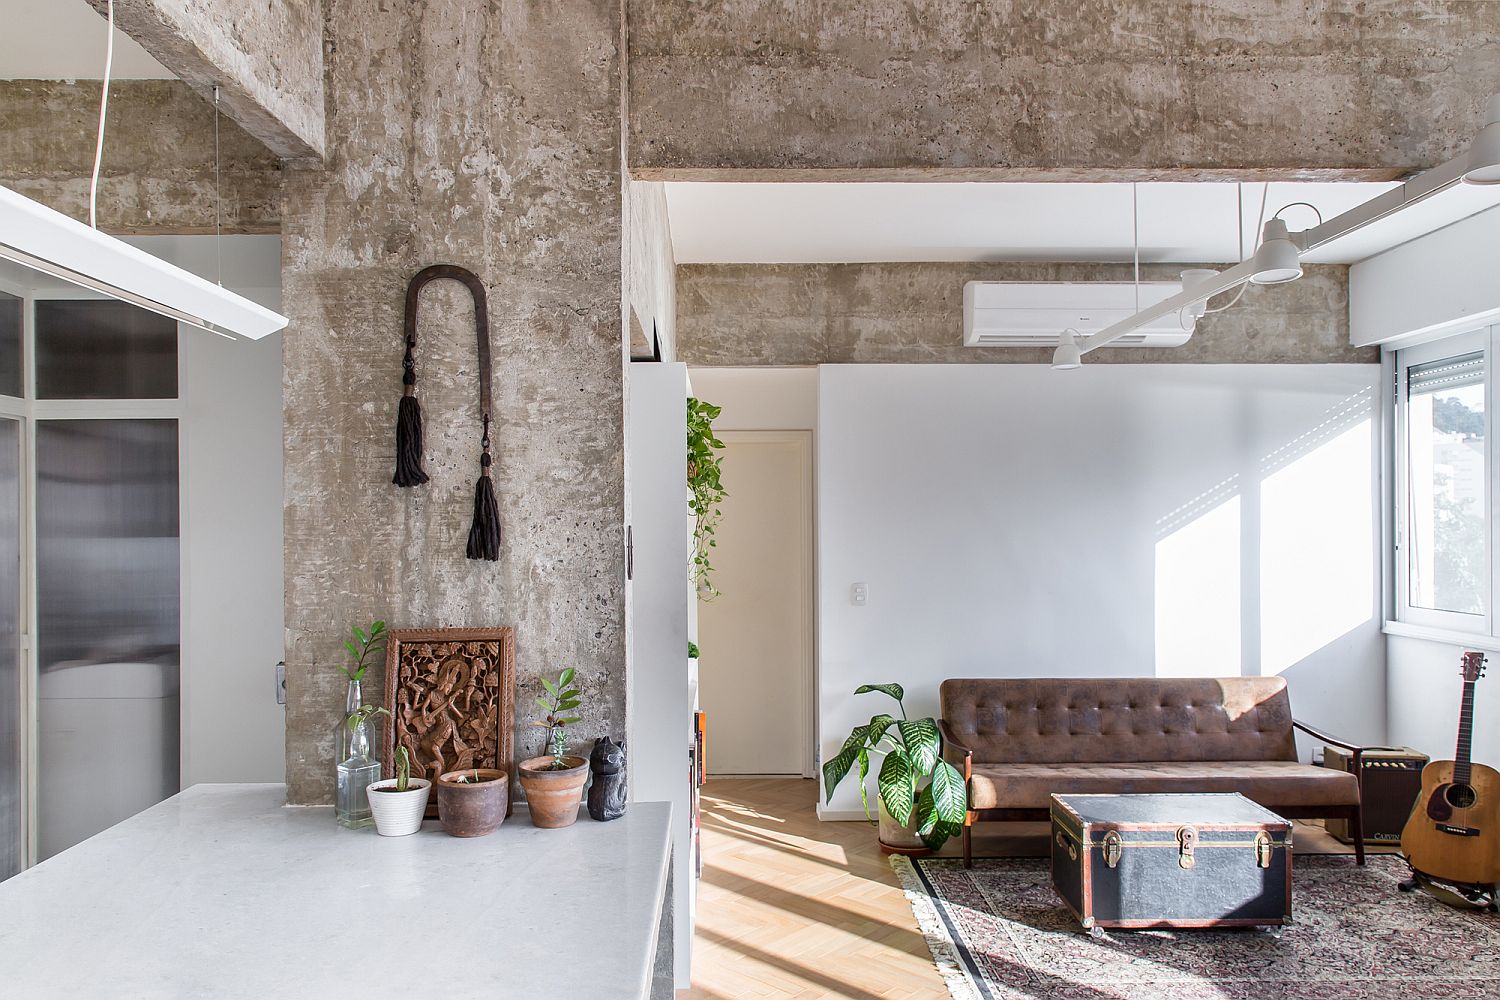 Natural-light-illuminates-the-rugged-concrete-living-space-of-the-apartment